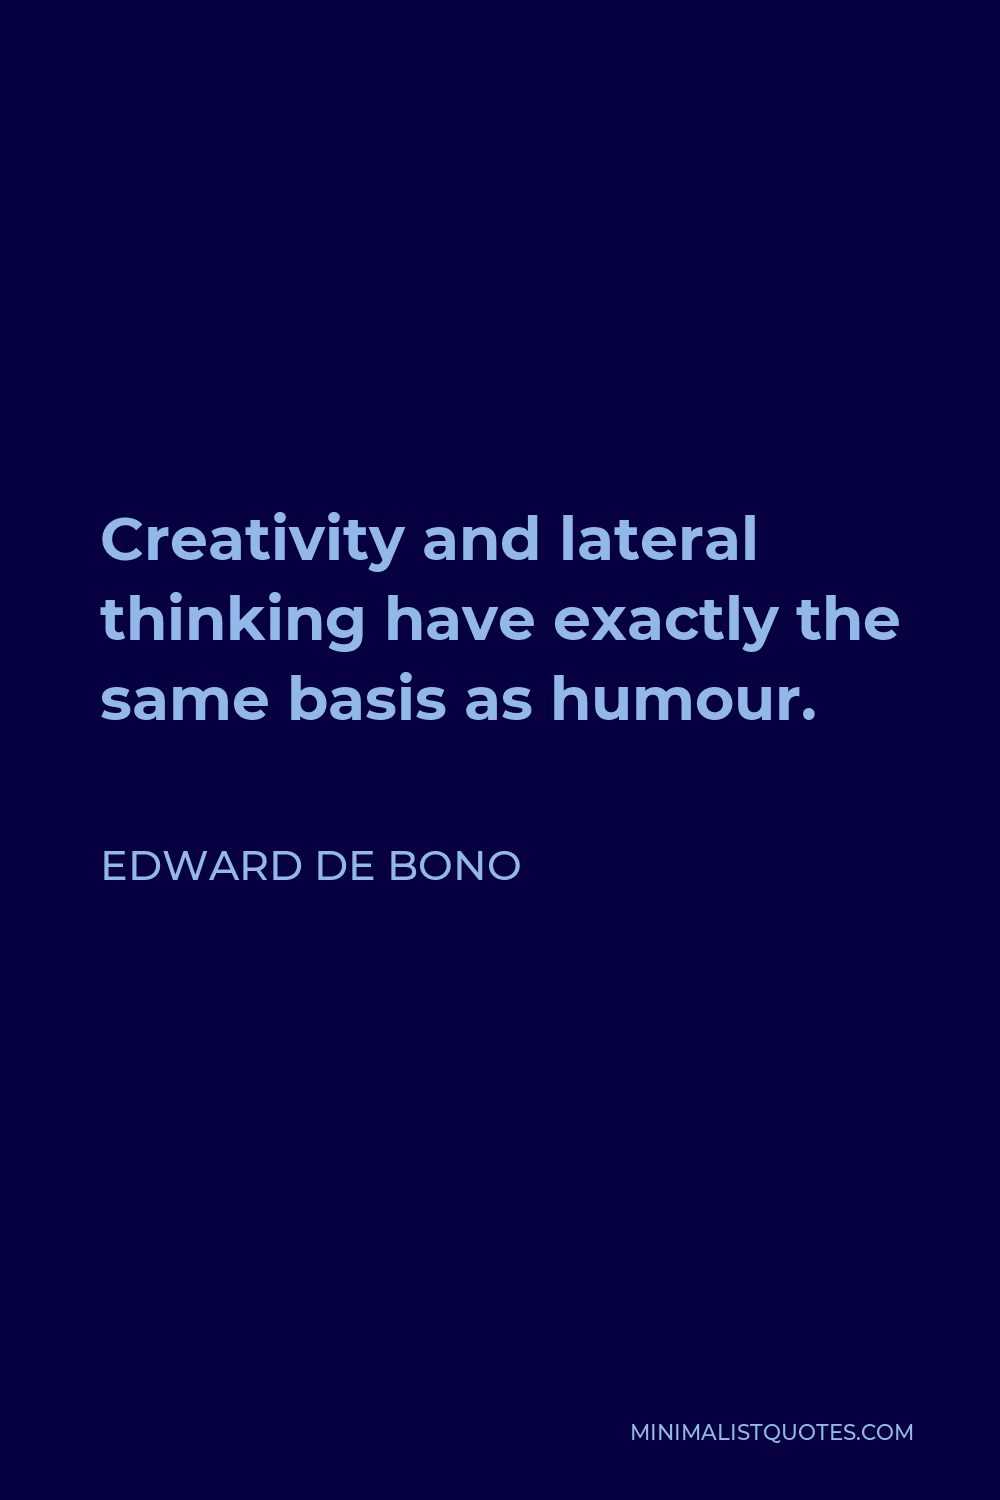 Edward de Bono Quote - Creativity and lateral thinking have exactly the same basis as humour.